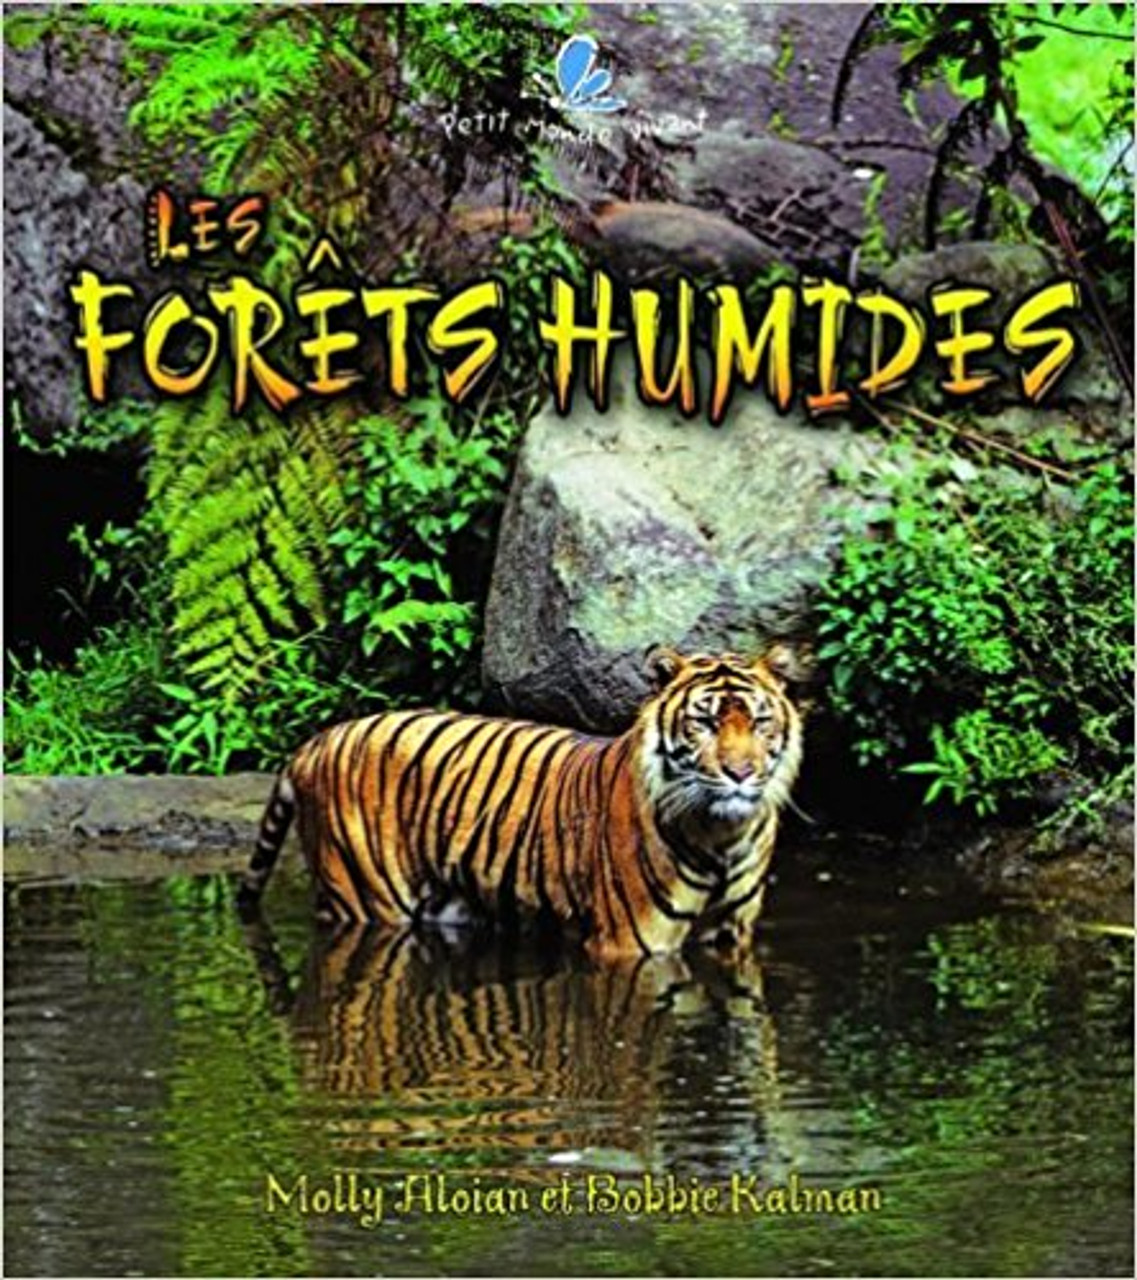 Les Forets Humides by Molly Aloian